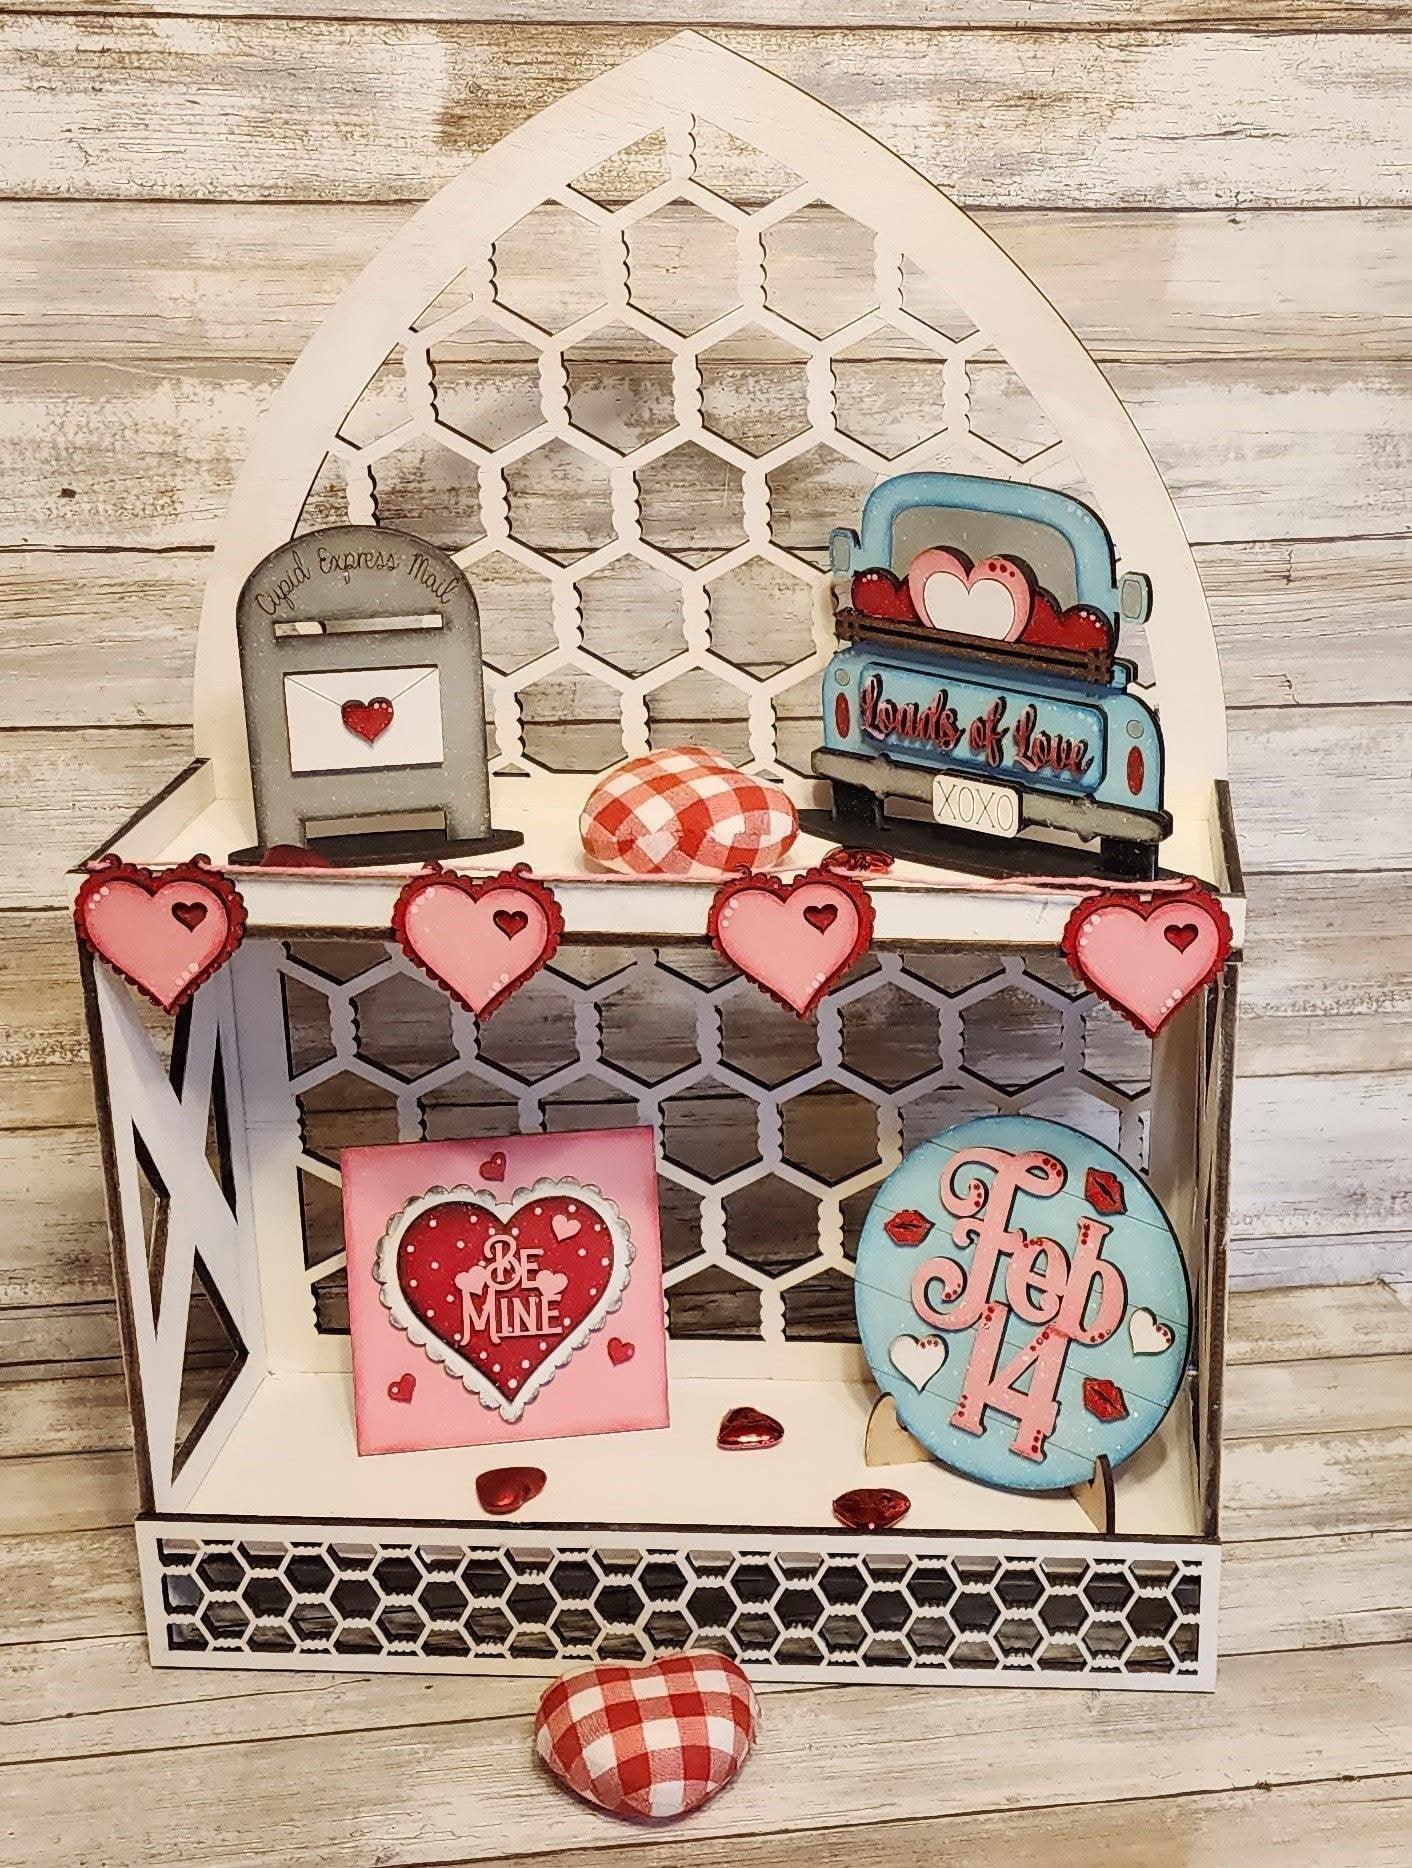 Loads of Love, Be Mine Valentines Tiered Tray Set , DIY Tiered Tray, Shelf Sitter - RusticFarmhouseDecor